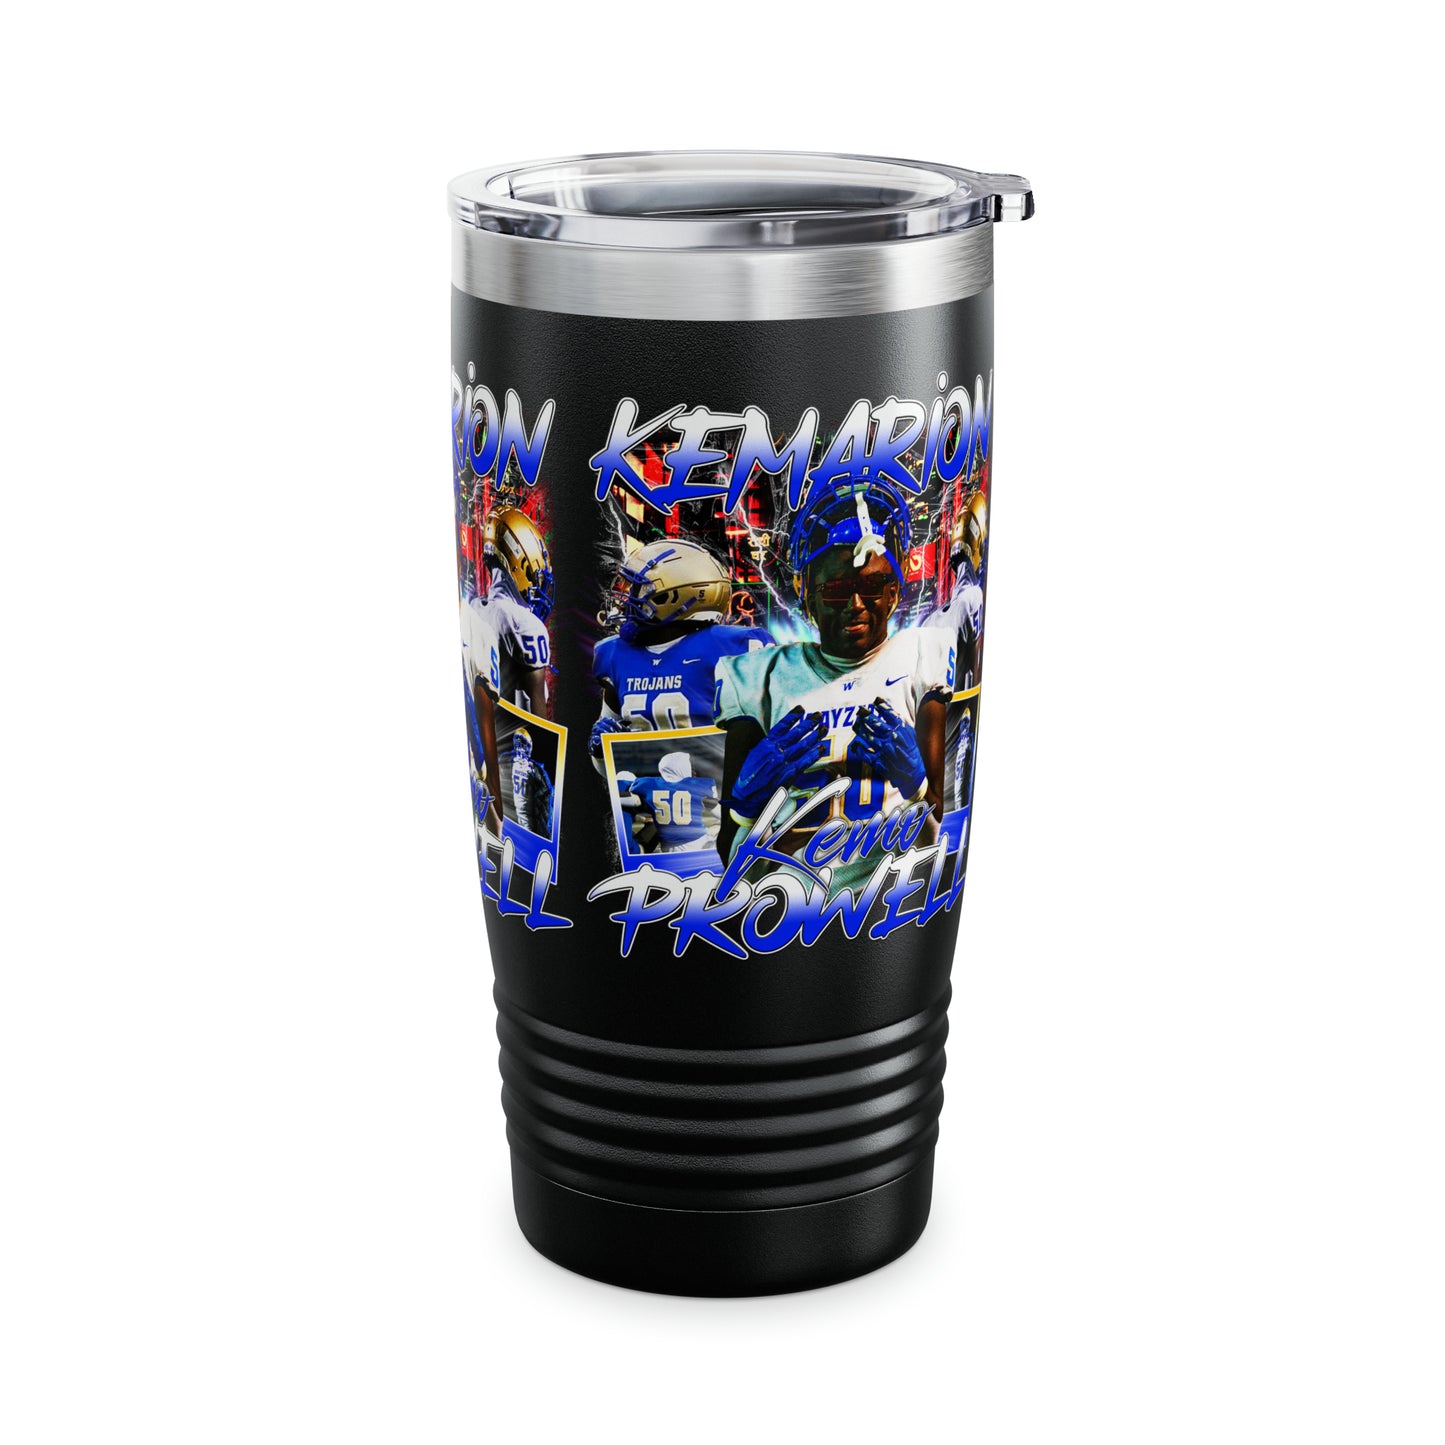 Kemarion Prowell Stainless Steel Tumbler